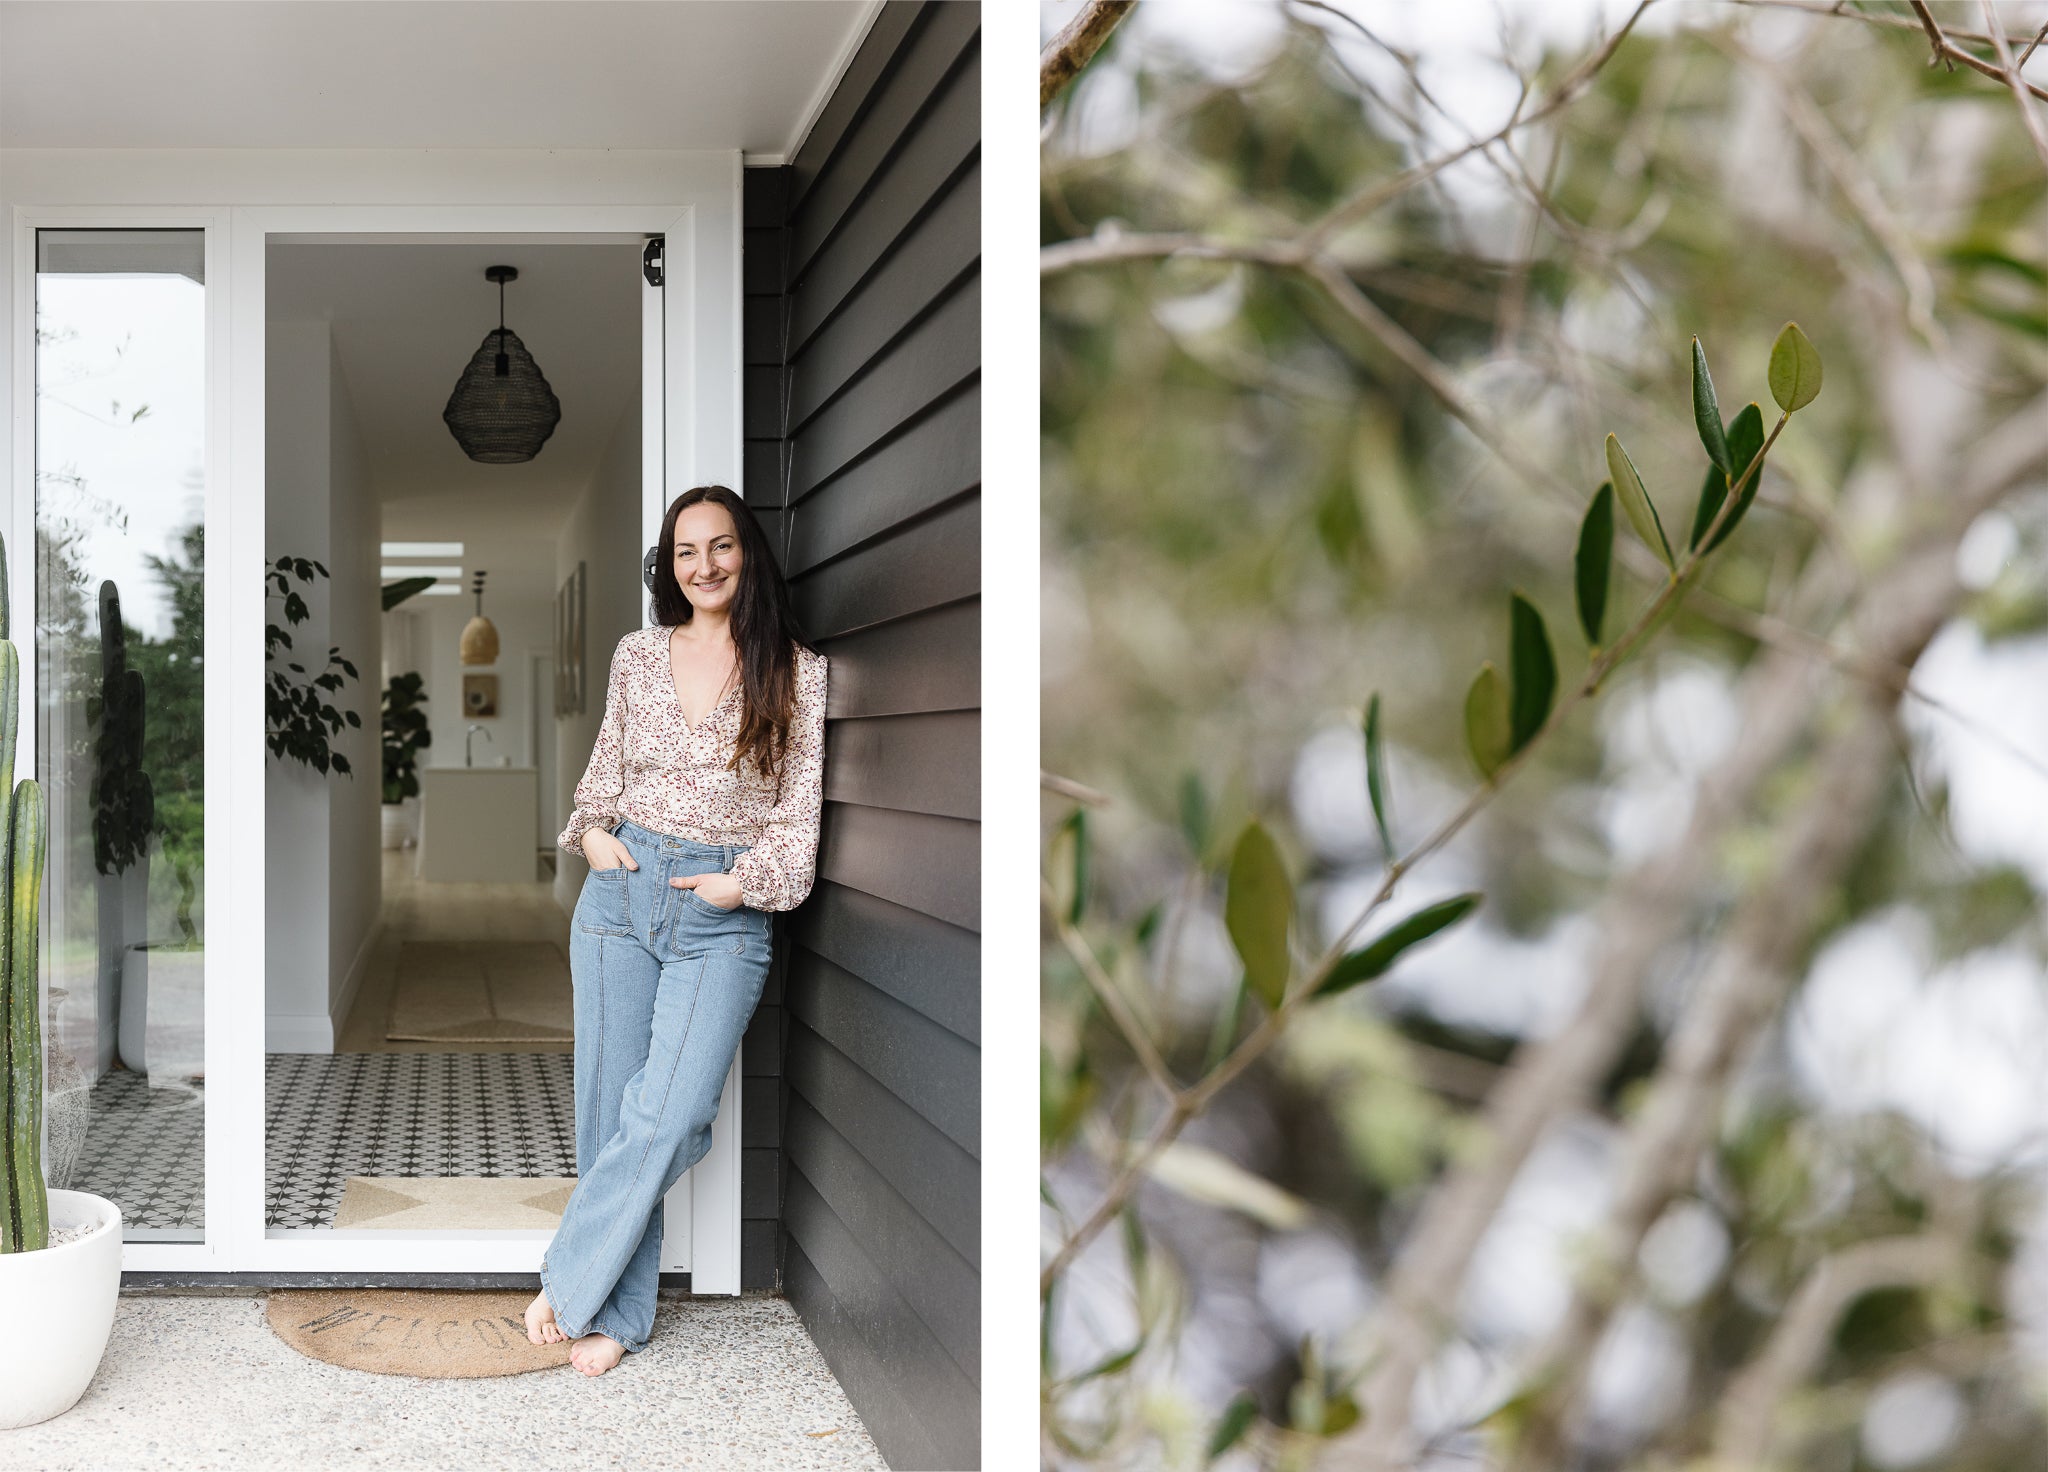 Home renovating tips The Dharma Door At Home With Sophie Riddle of The Olive Grove home